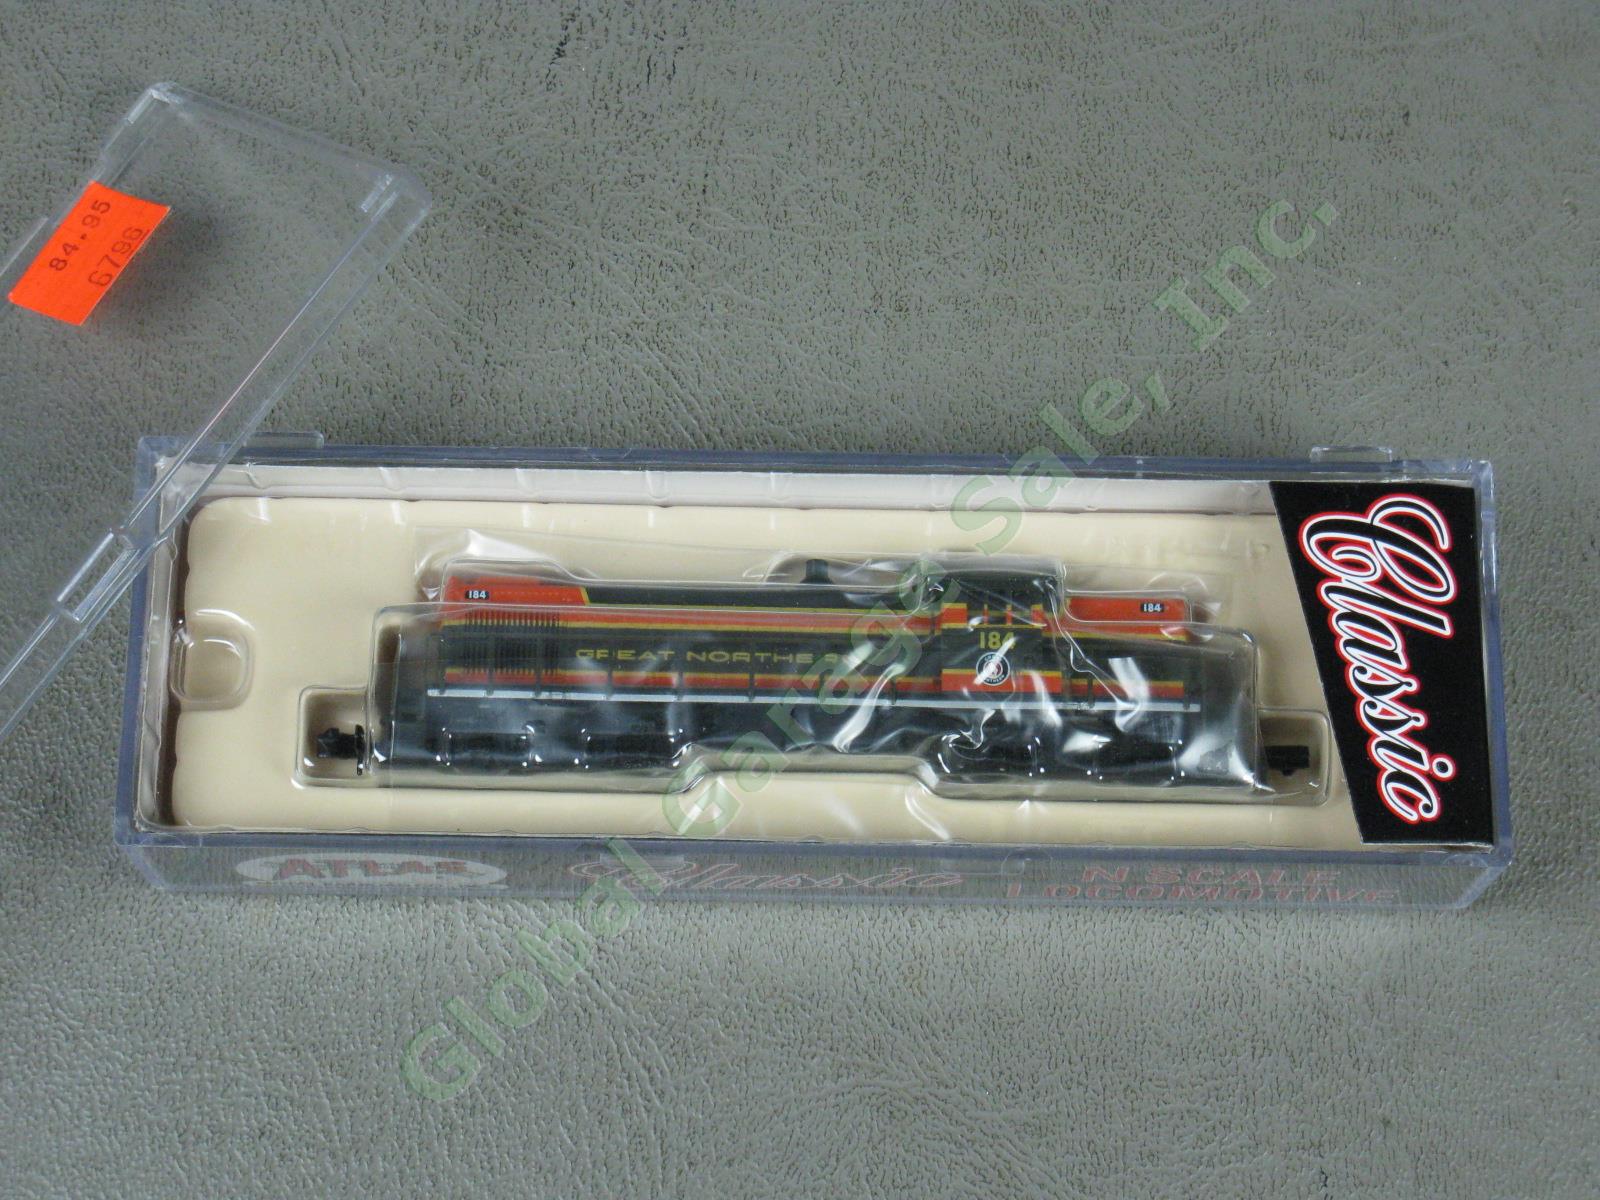 NEW Atlas N-Scale Locomotive 44006 RS-1 Alco Great Northern #184 GN Railroad 1